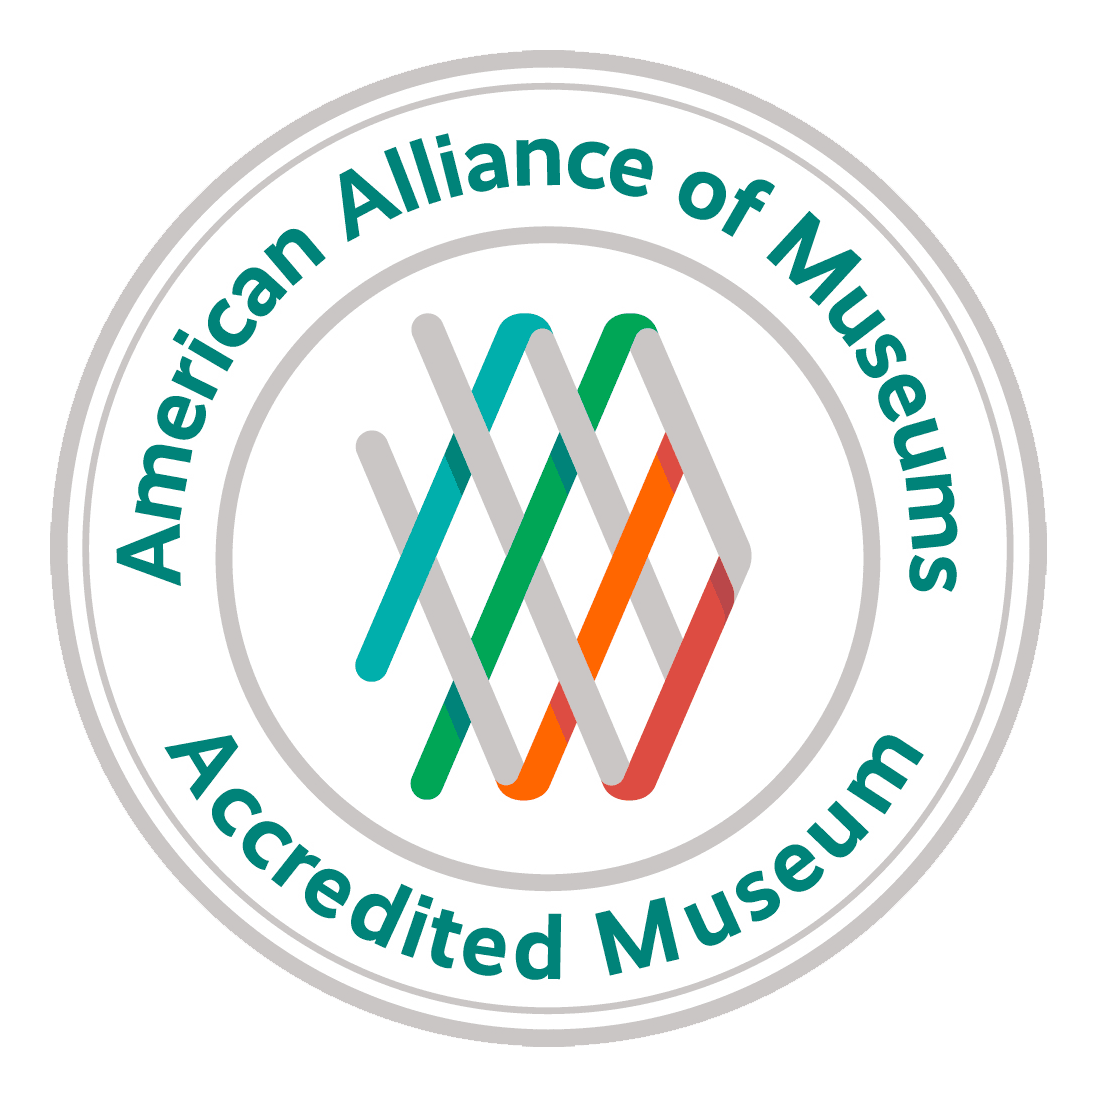 Accredited Museum (by the American Alliance of Museums)